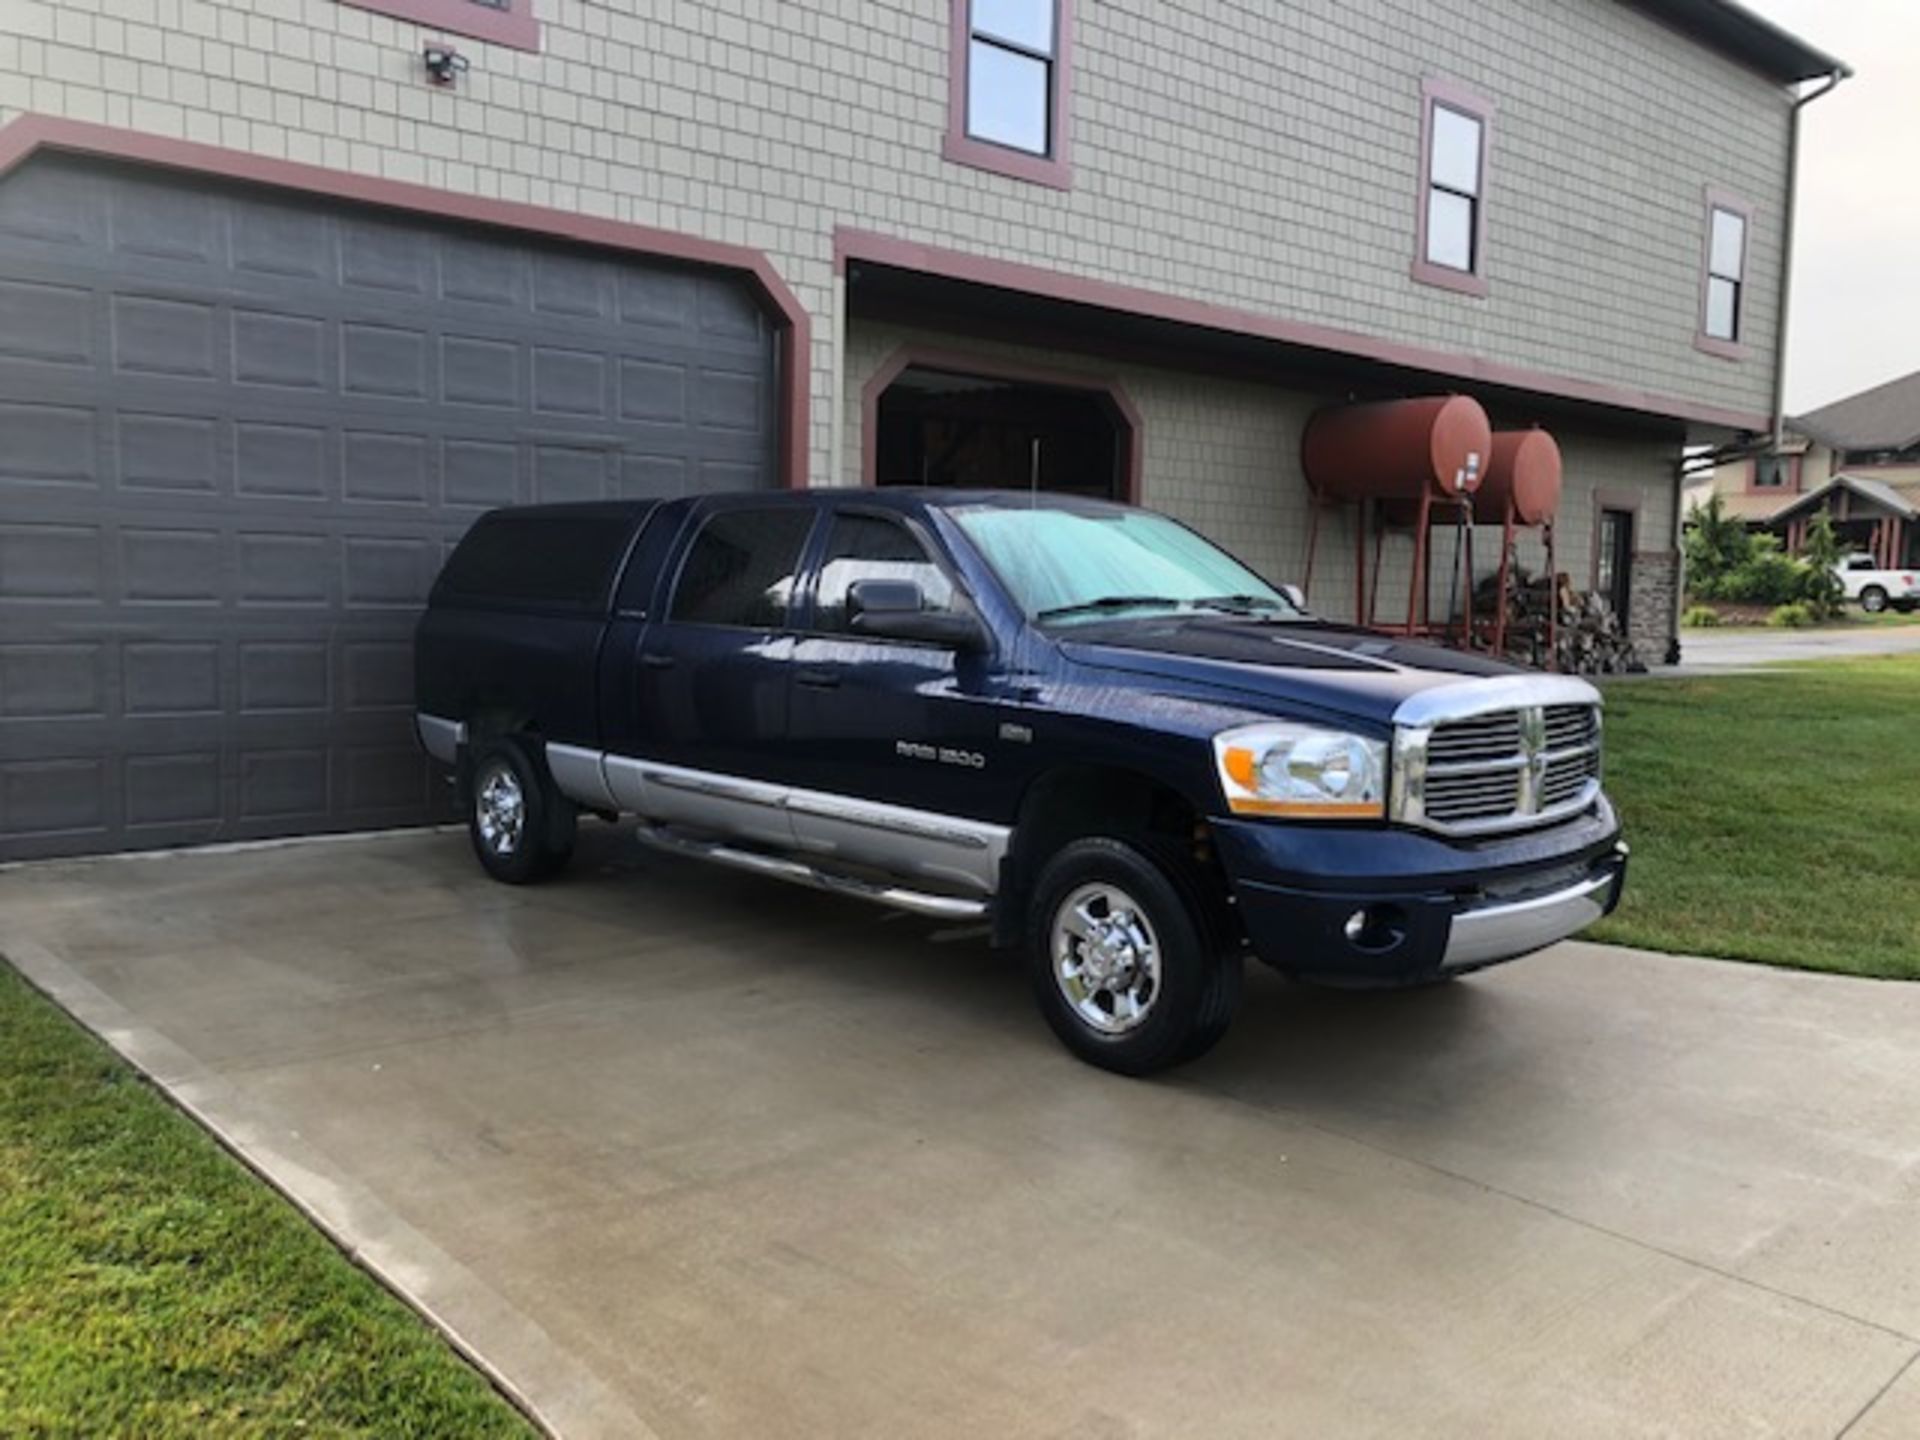 2006 DODGE RAM 1500 PICKUP TRUCK W/APPROX. 150K MILES - Image 2 of 12